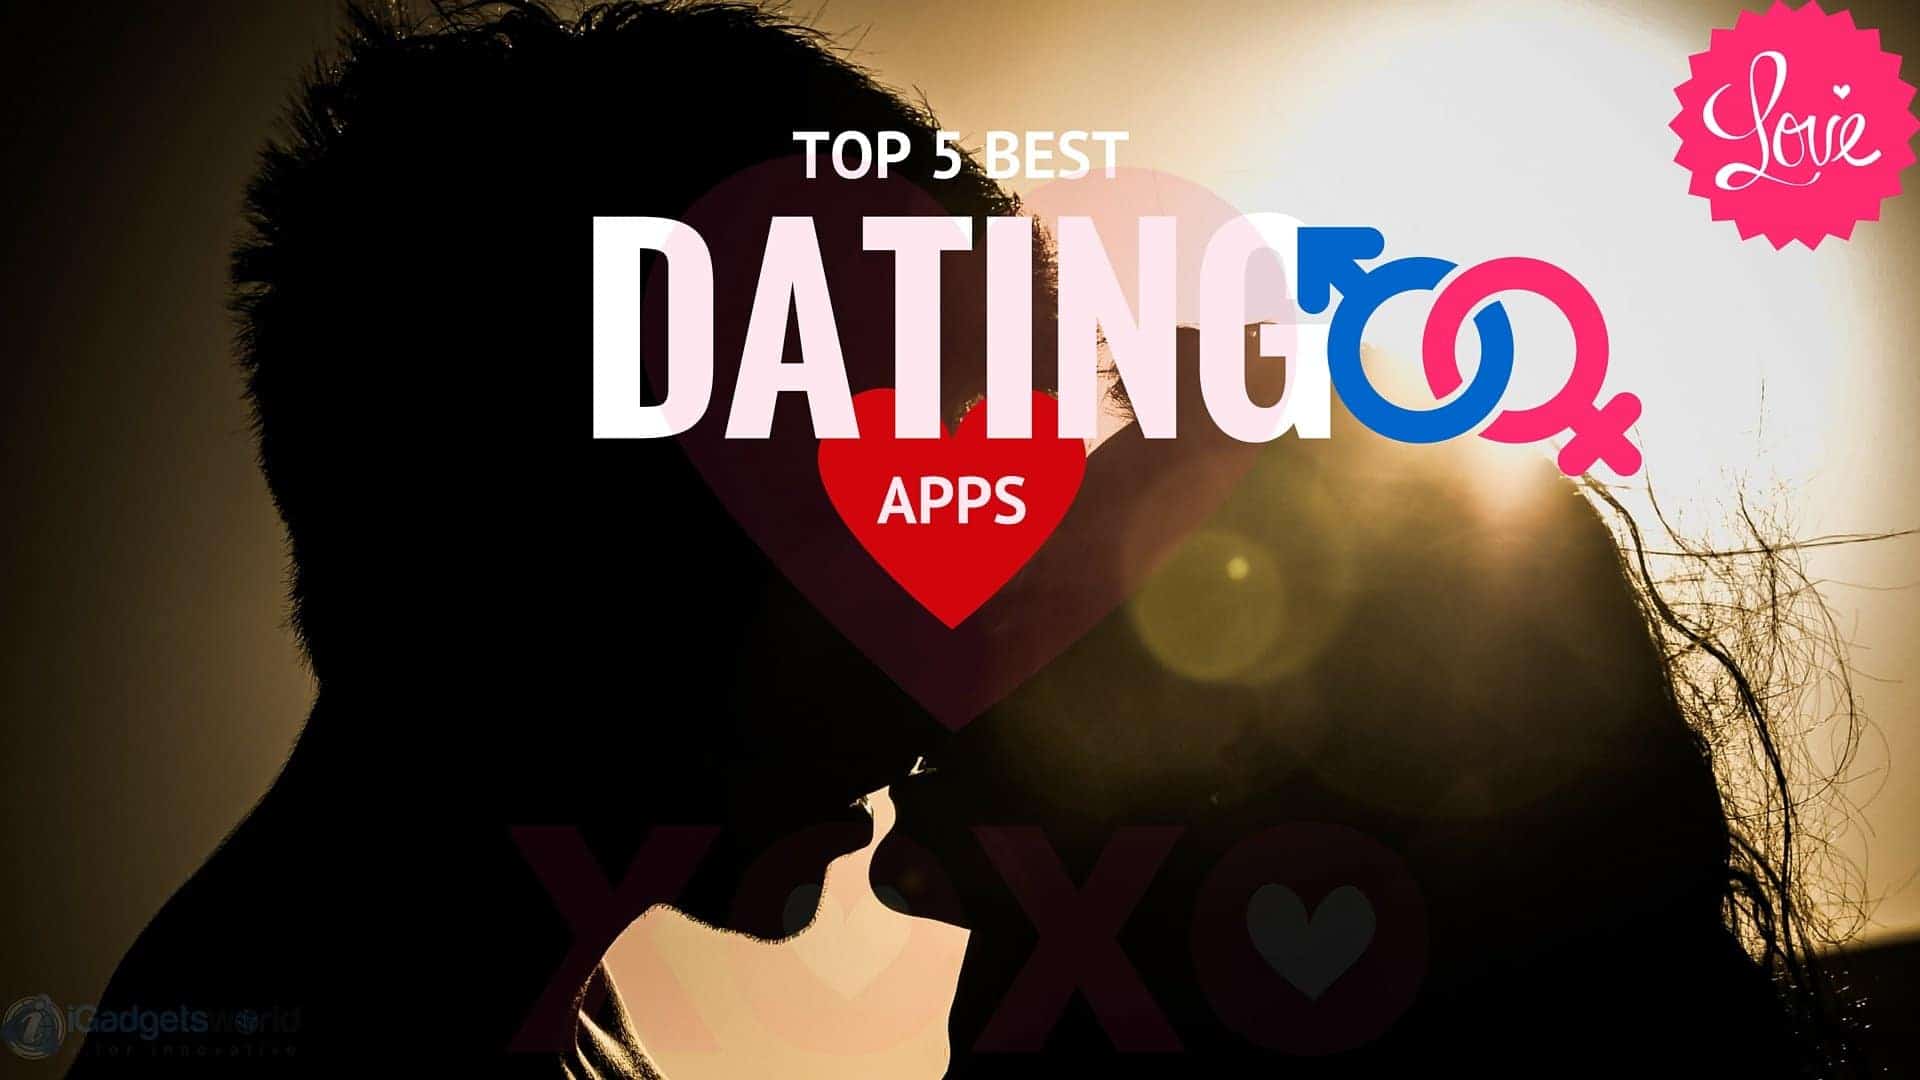 Indian dating apps in uns